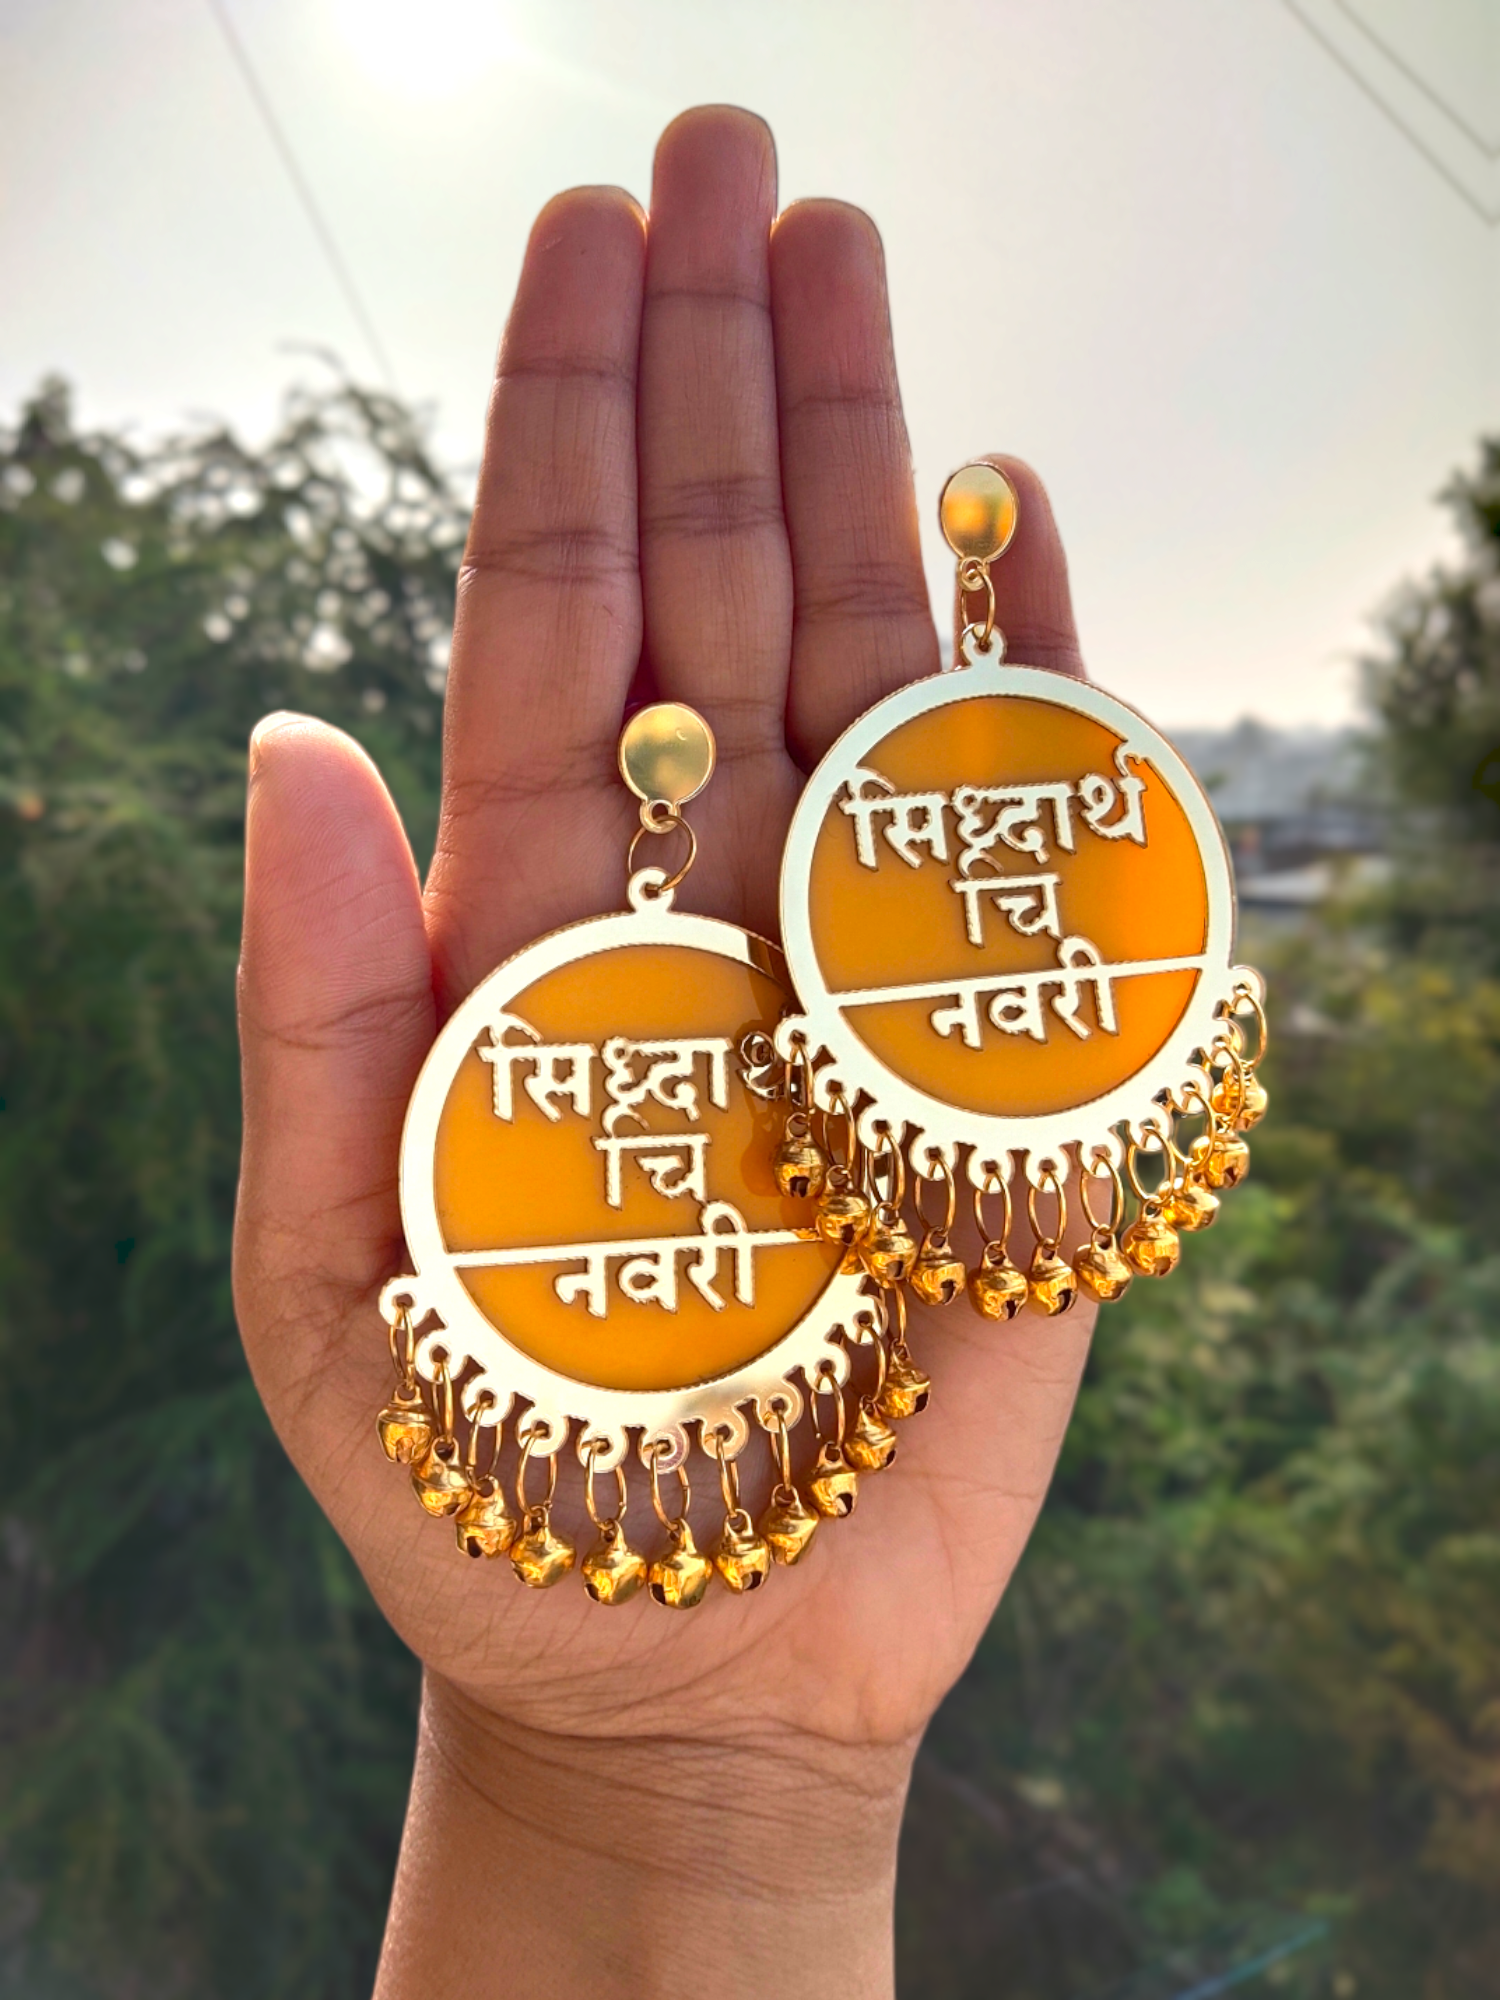 Vibrant yellow Dulhaniya earrings capturing intricate detailing and personalized text in Hindi and Marathi, exemplifying superb craftsmanship and cultural opulence